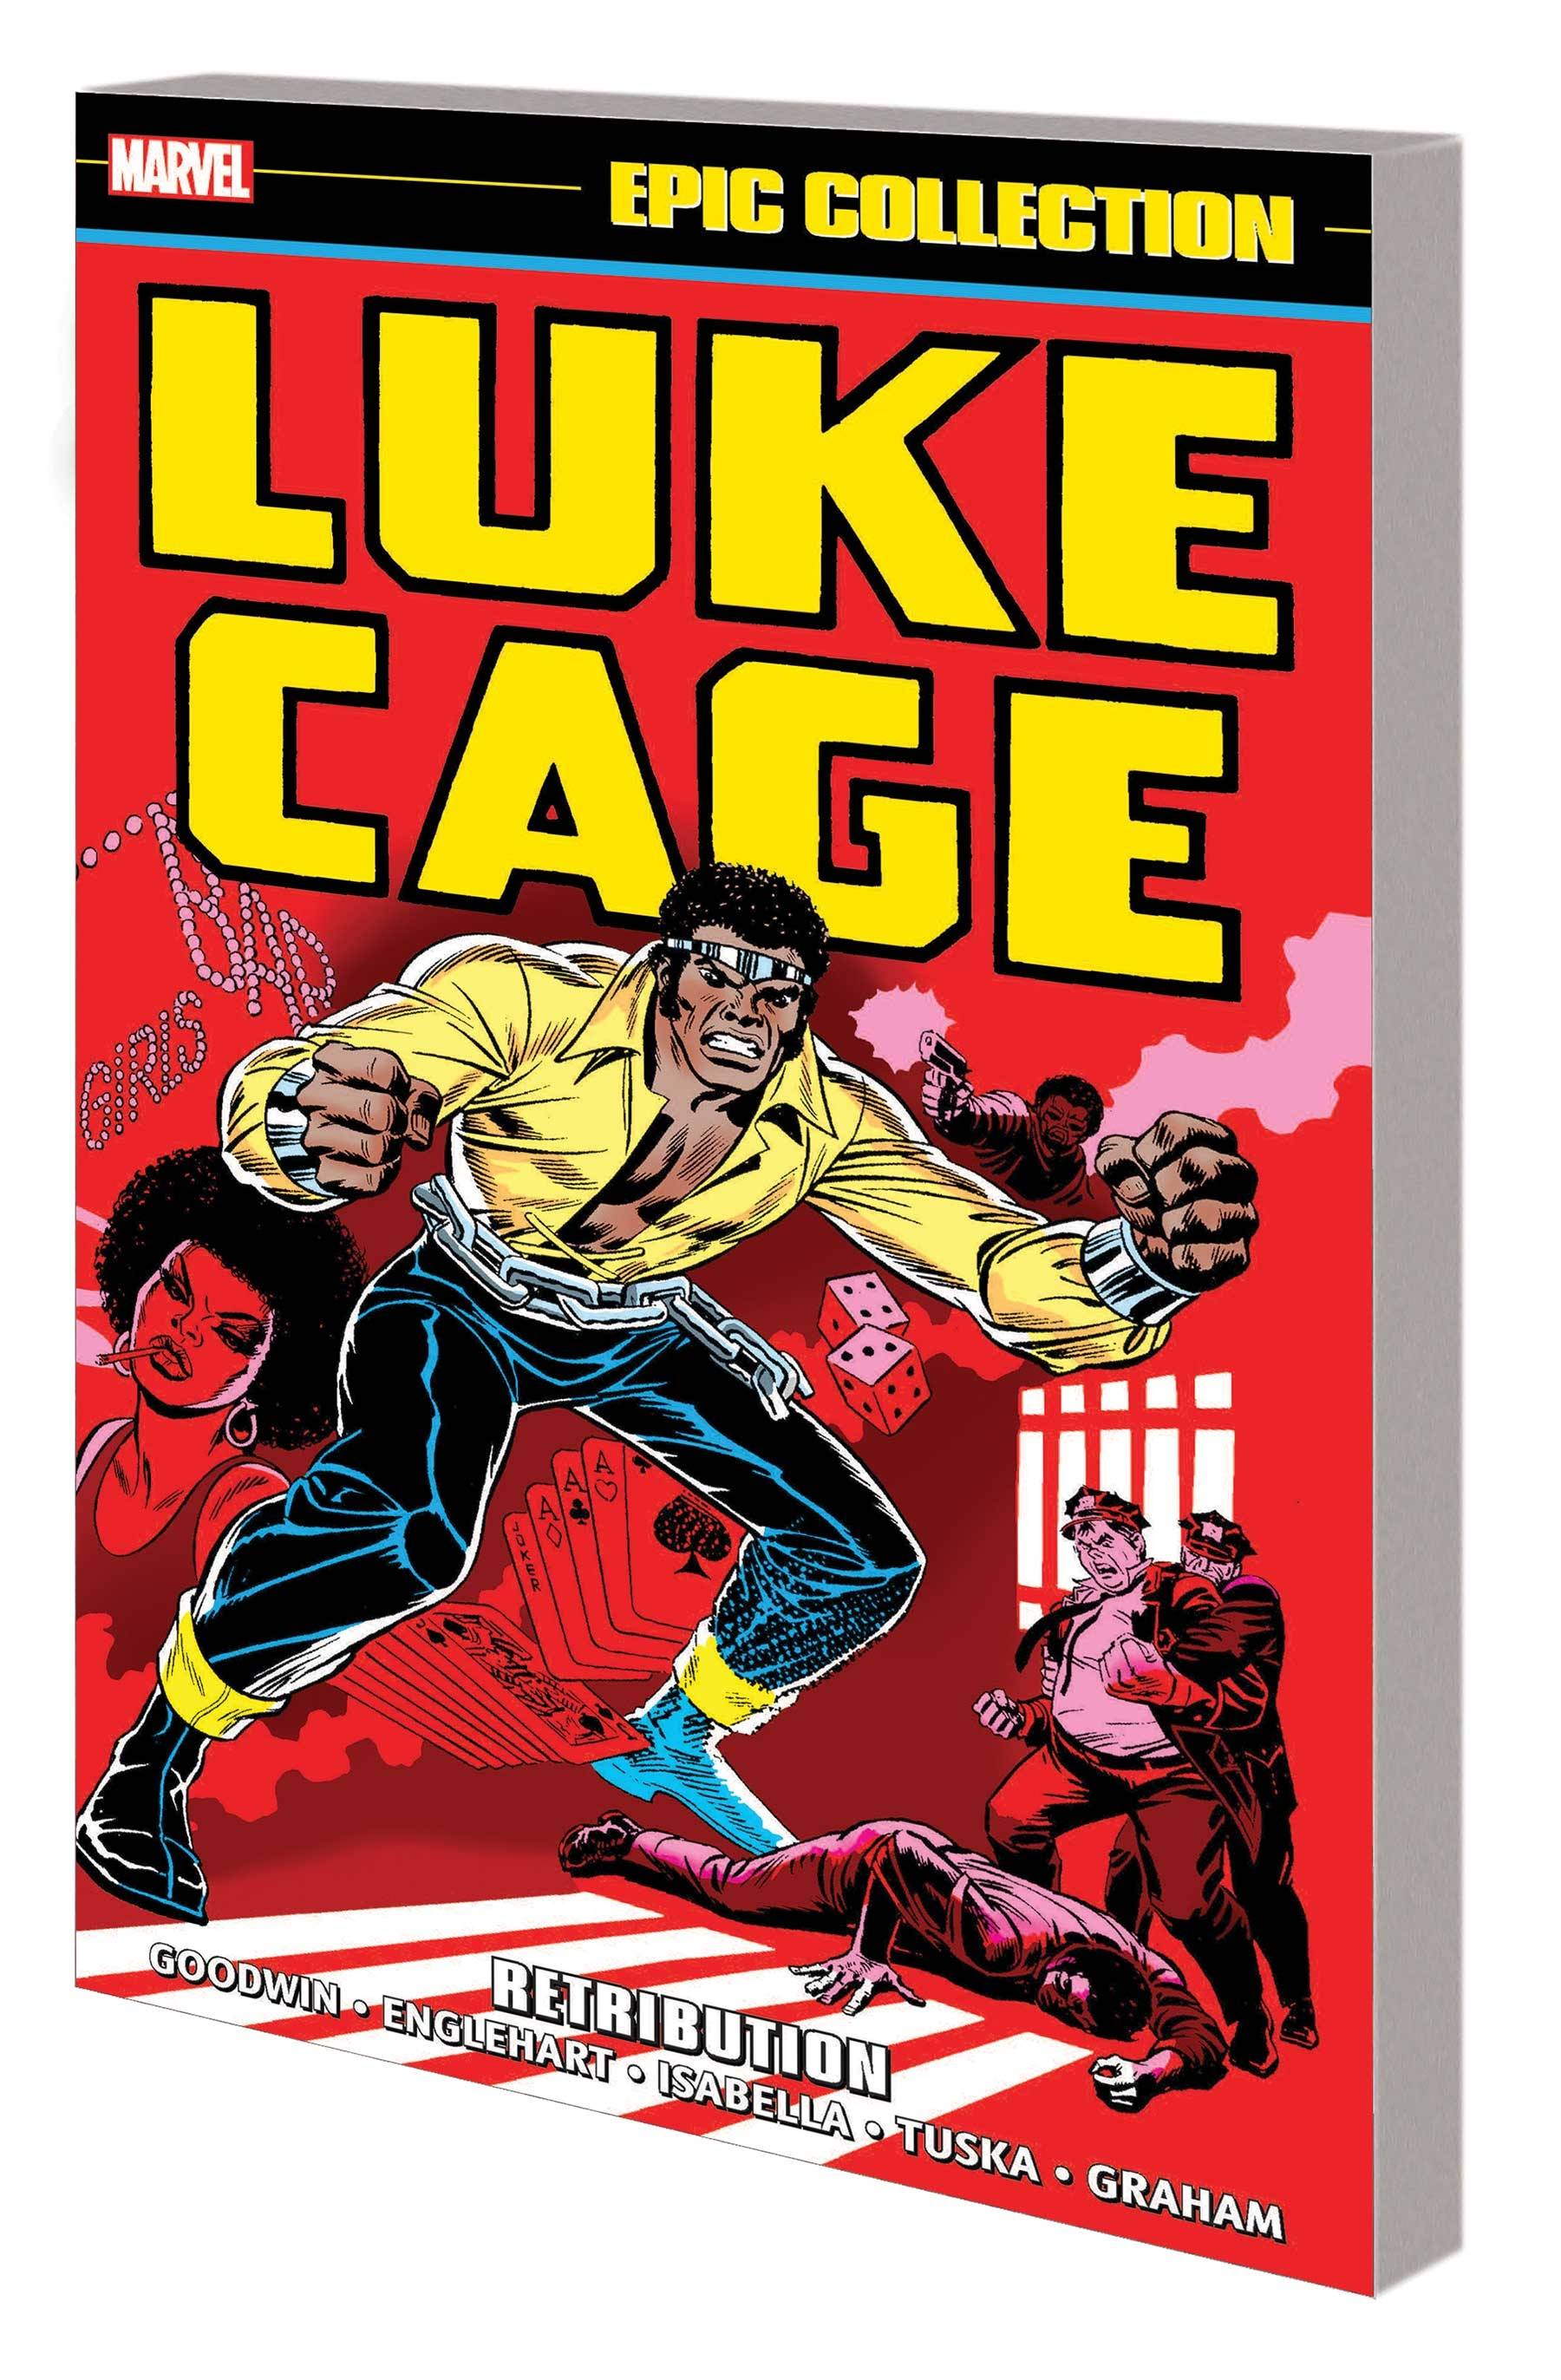 LUKE CAGE EPIC COLLECTION TP RETRIBUTION